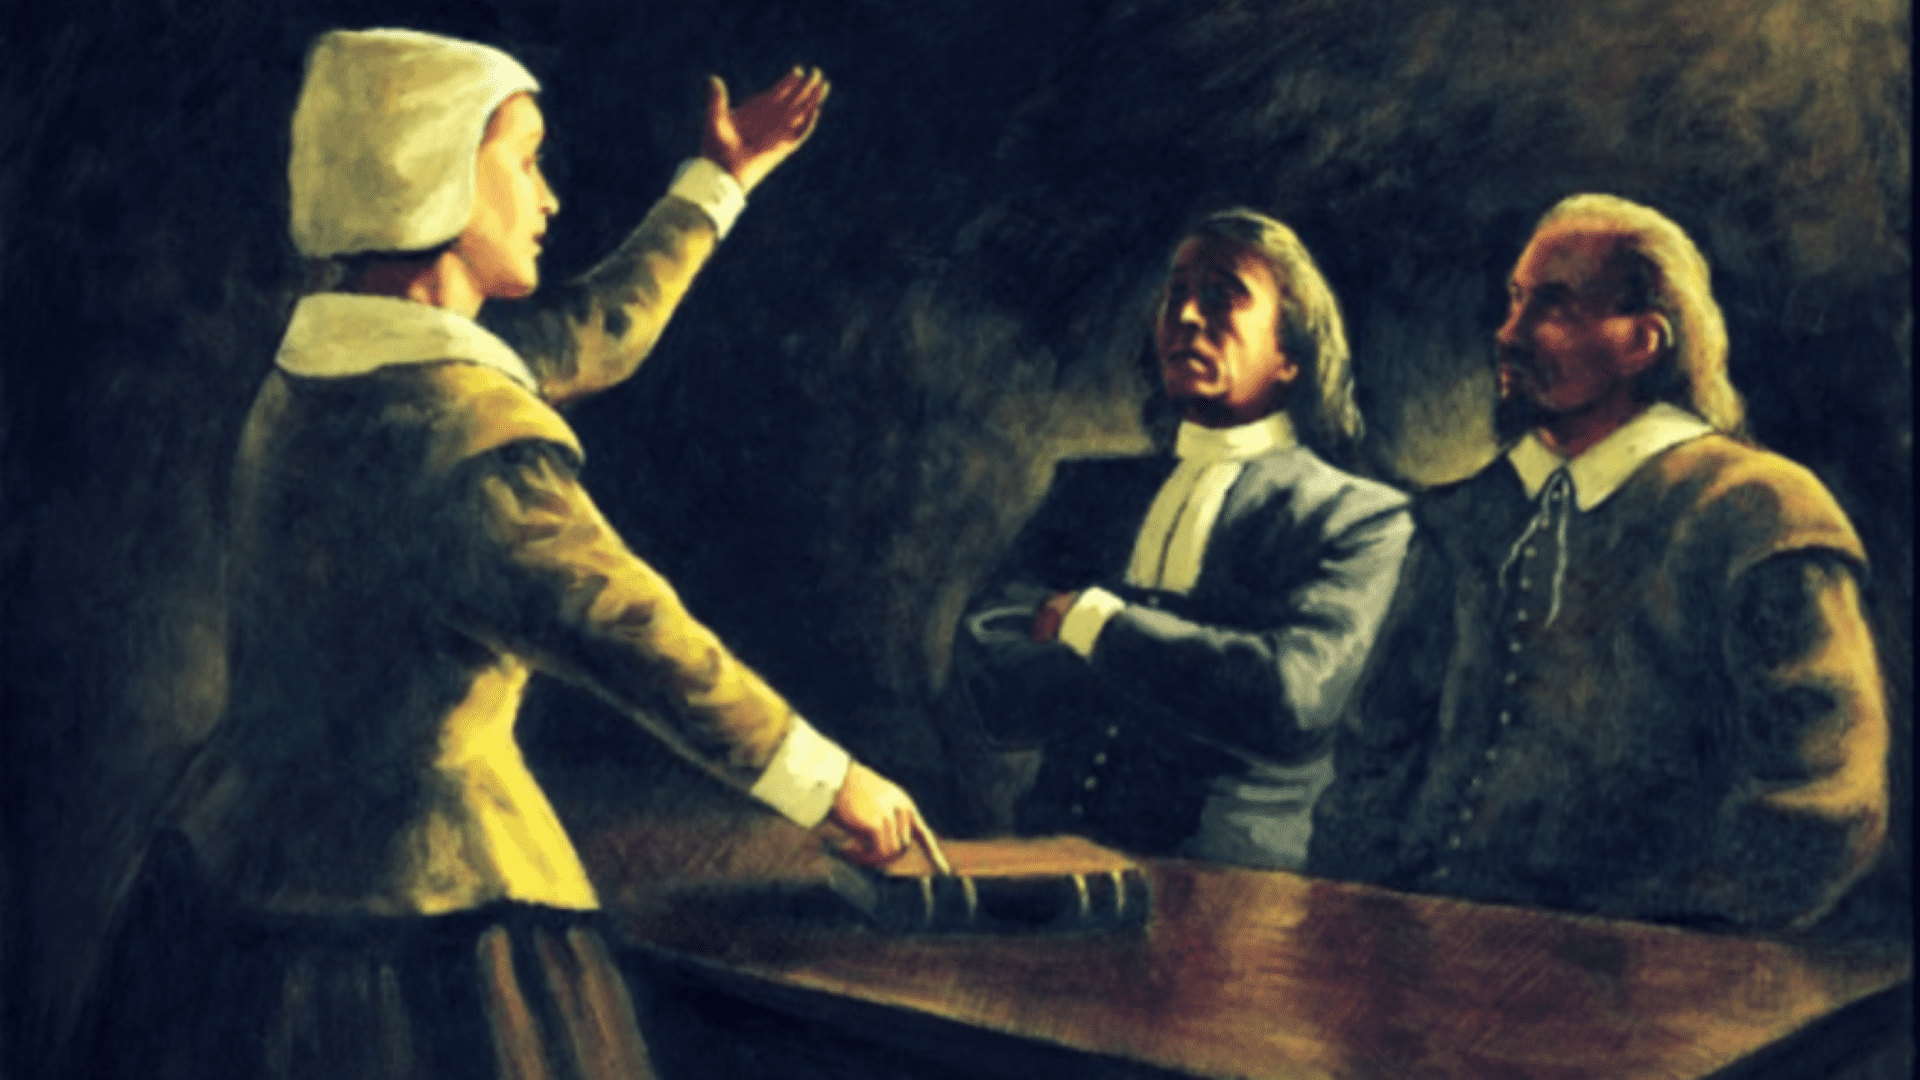 Anne Hutchinson, persecuted by the Massachusetts Bay theocracy, planted the seeds of libertarianism that would help establish a new nation.